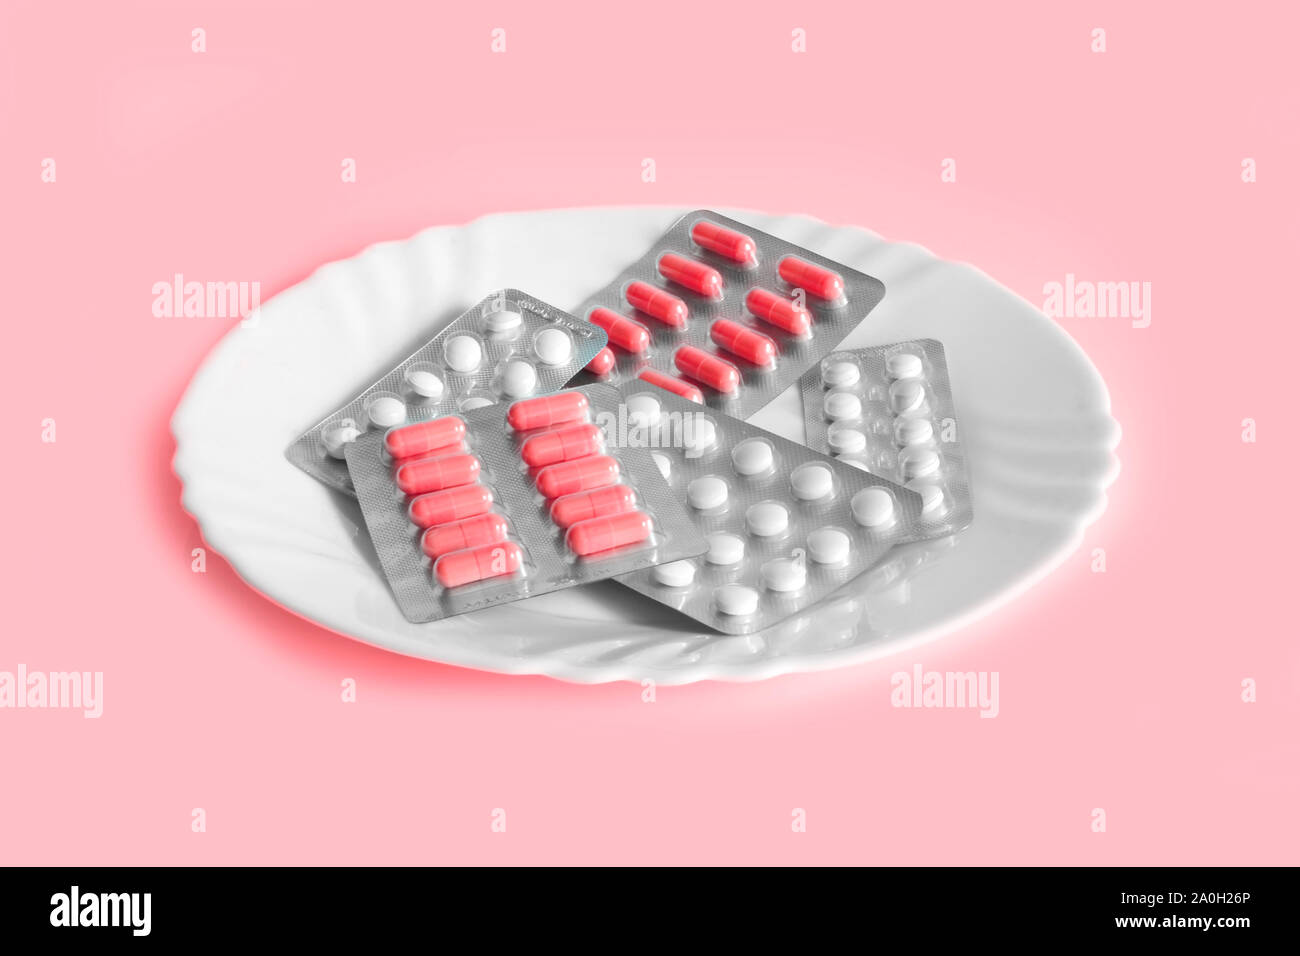 Different pills on a plate. The concept of prescription drugs for weight loss. Means for suppressing appetite. Stock Photo